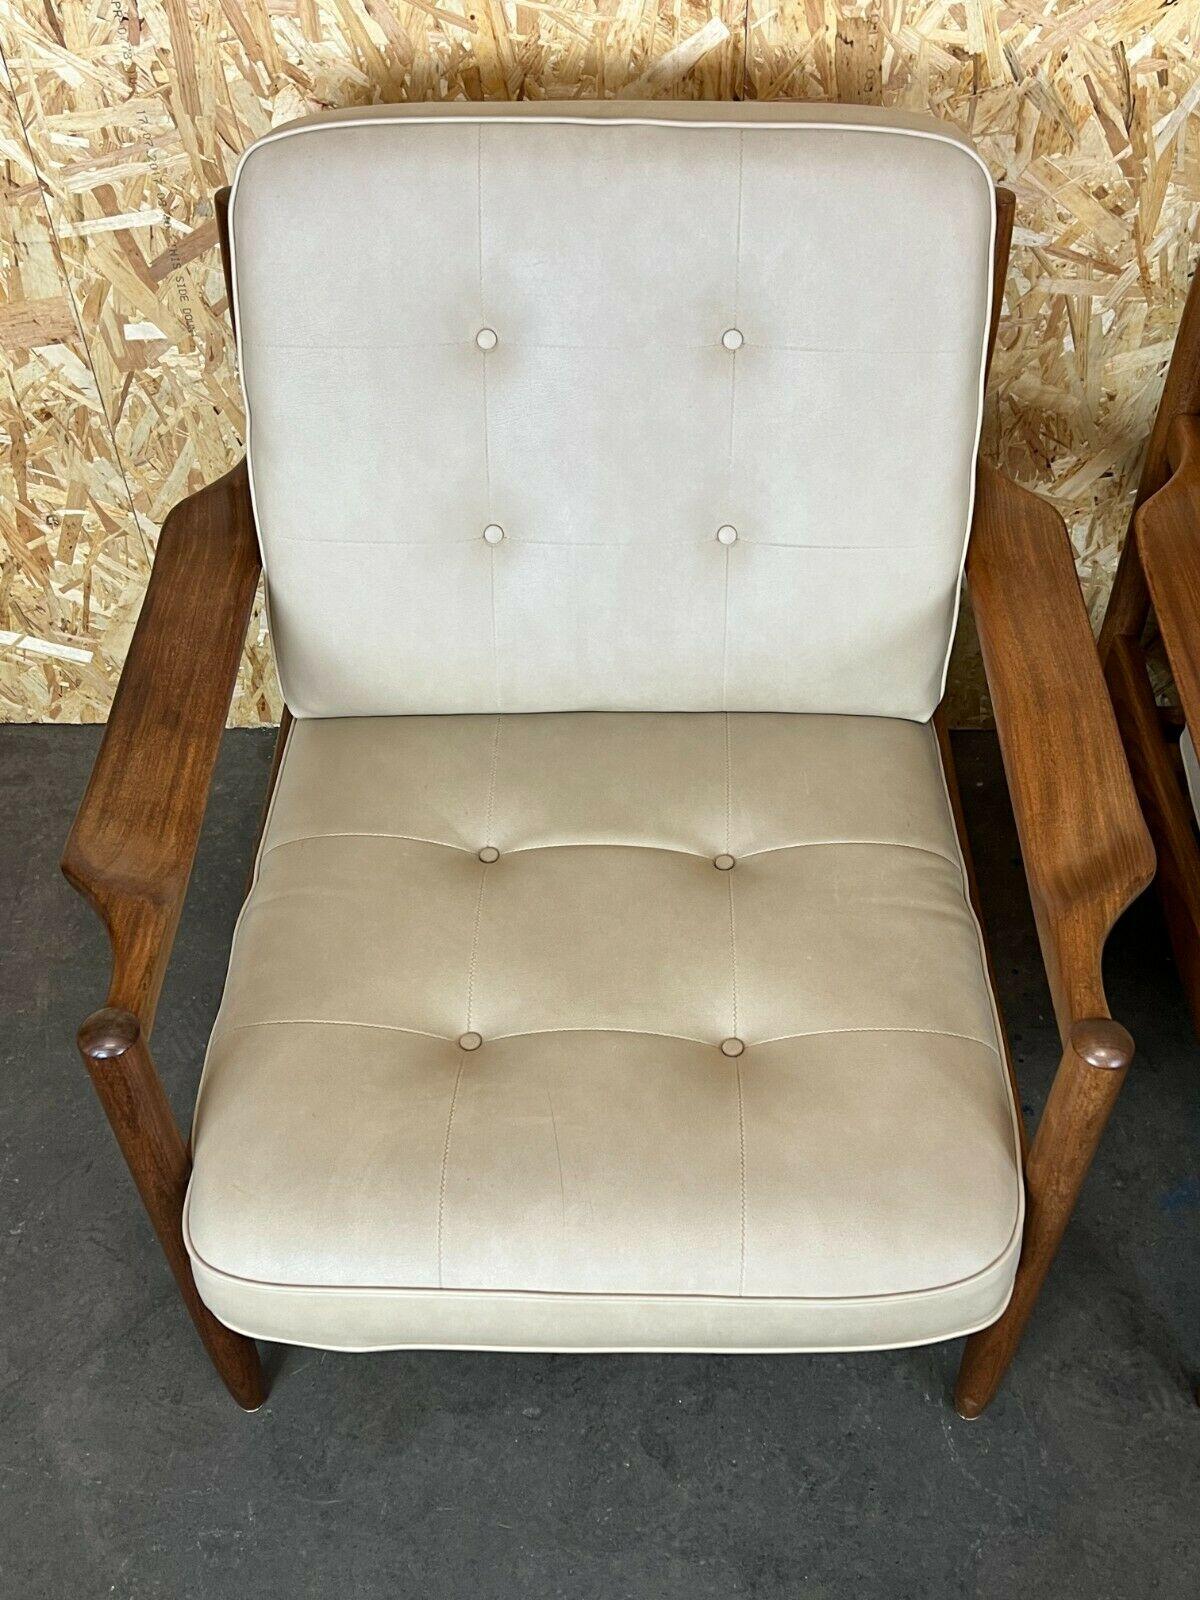 2x 60s 70s Easy Chair Lounge Chair Danish Modern Design In Good Condition For Sale In Neuenkirchen, NI